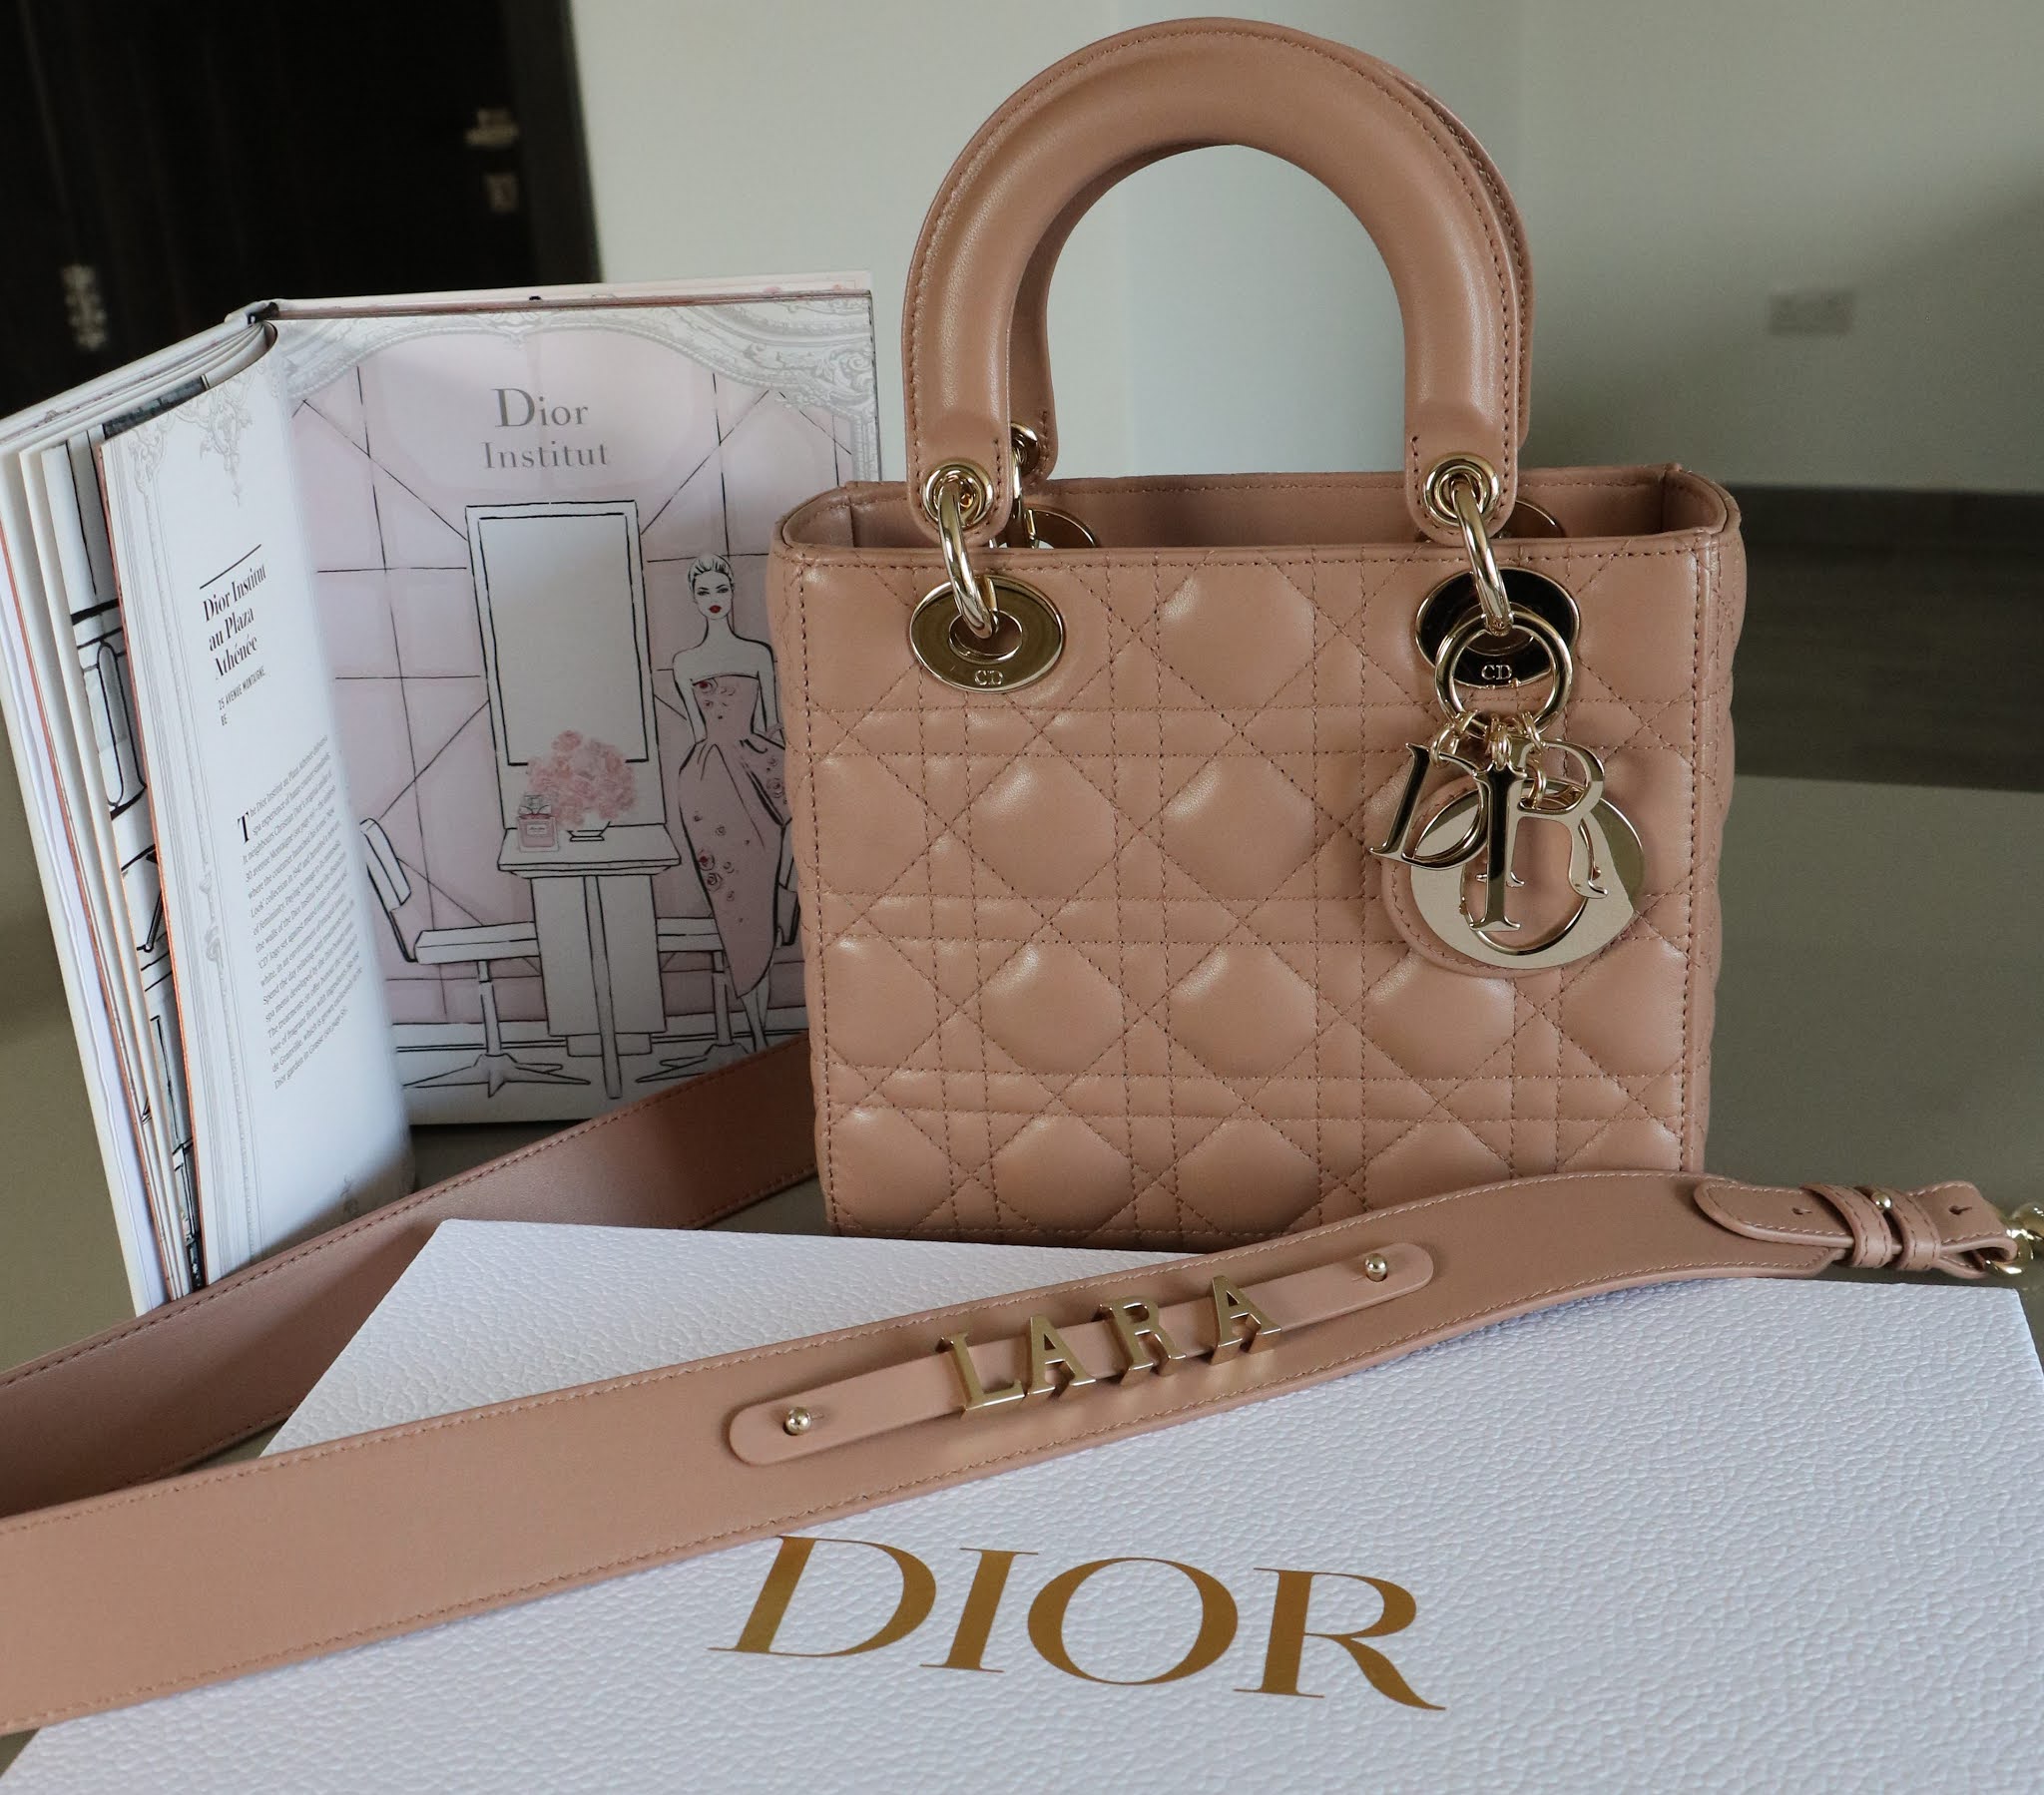 How to save money on luxury purchases  Top tips for saving money on  designer items - The VoucherCodes Blog